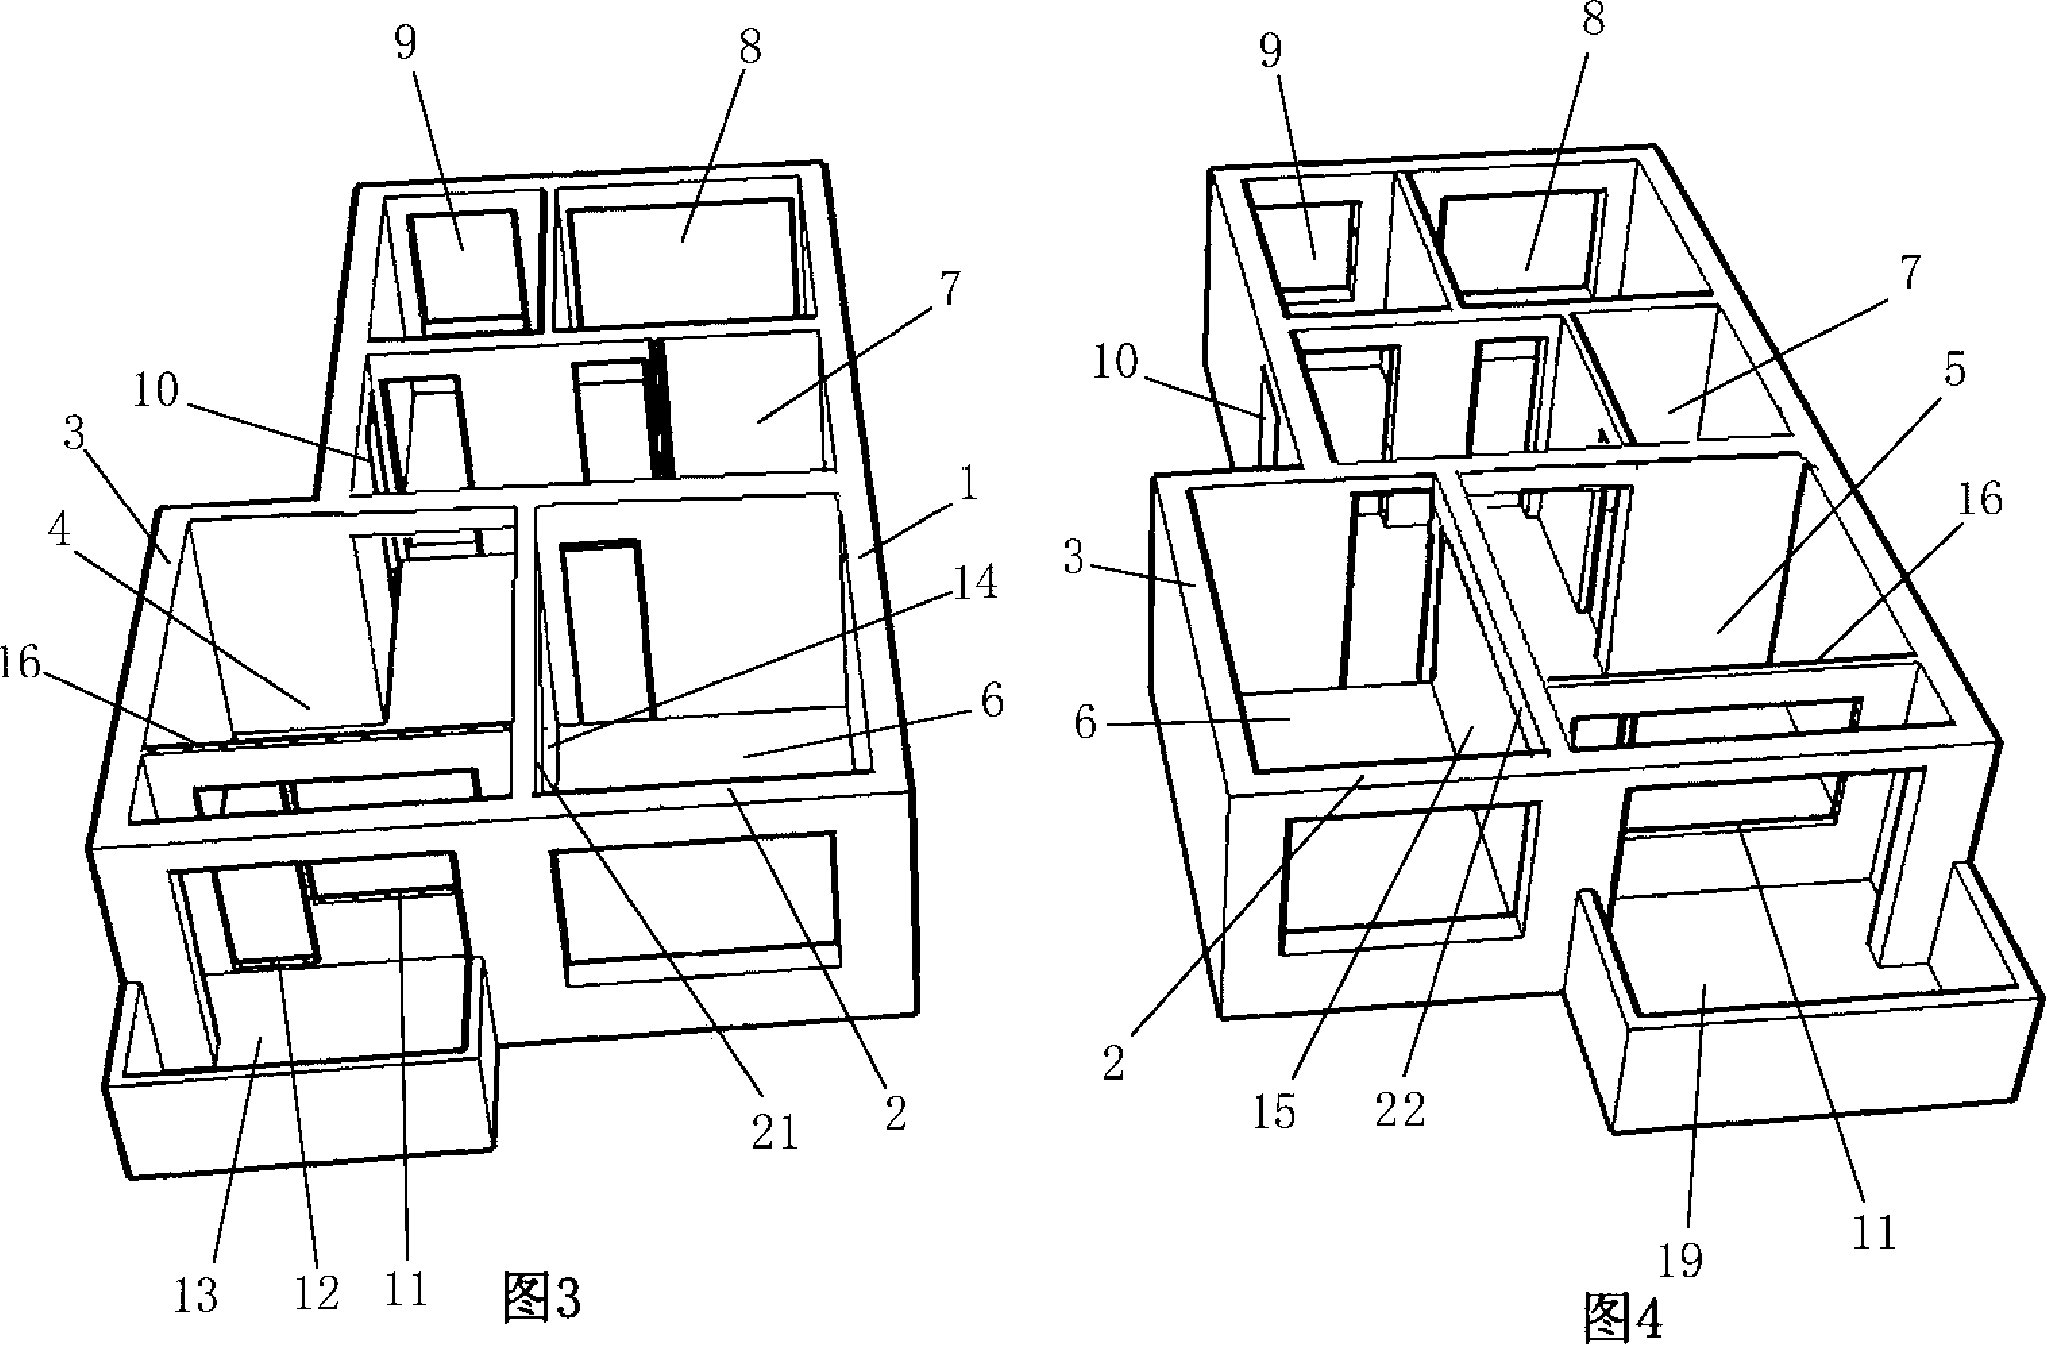 Multilayer and high-rise residential building of odd and even layer asymmetric matrix